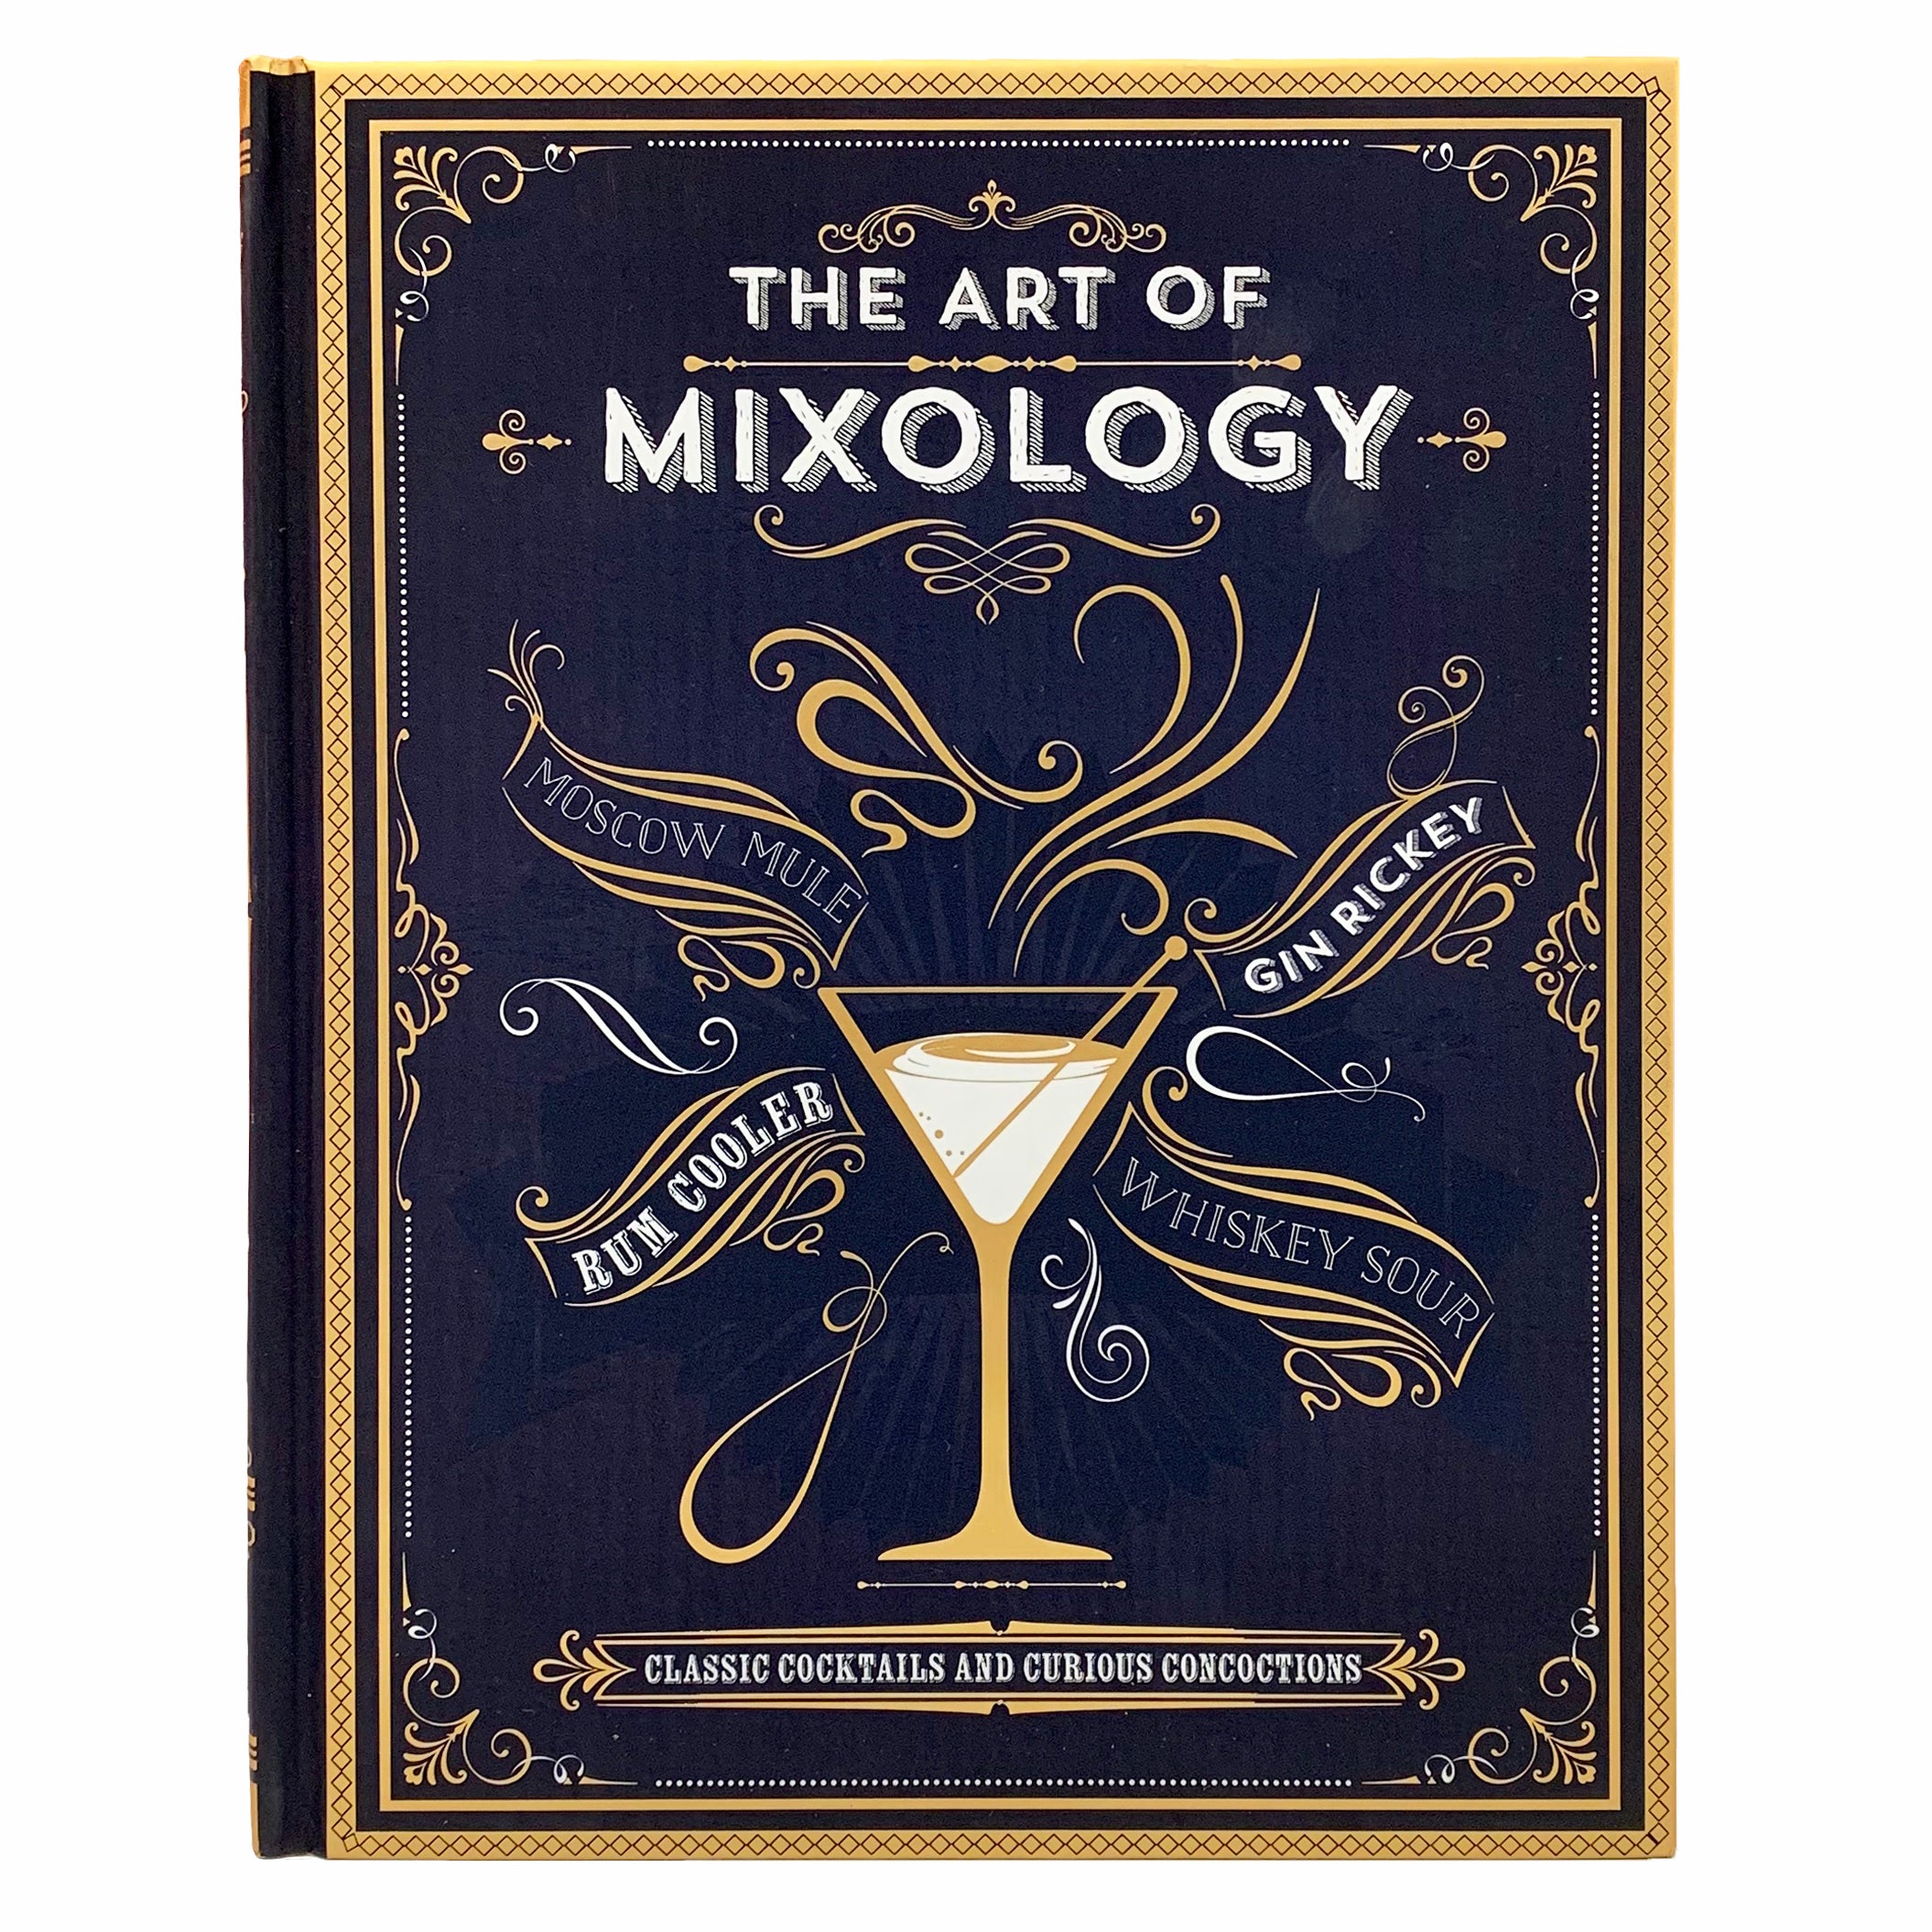 The Art of Mixology: Bartender's Guide to Gin: Classic and Modern-Day Cocktails for Gin Lovers [Book]